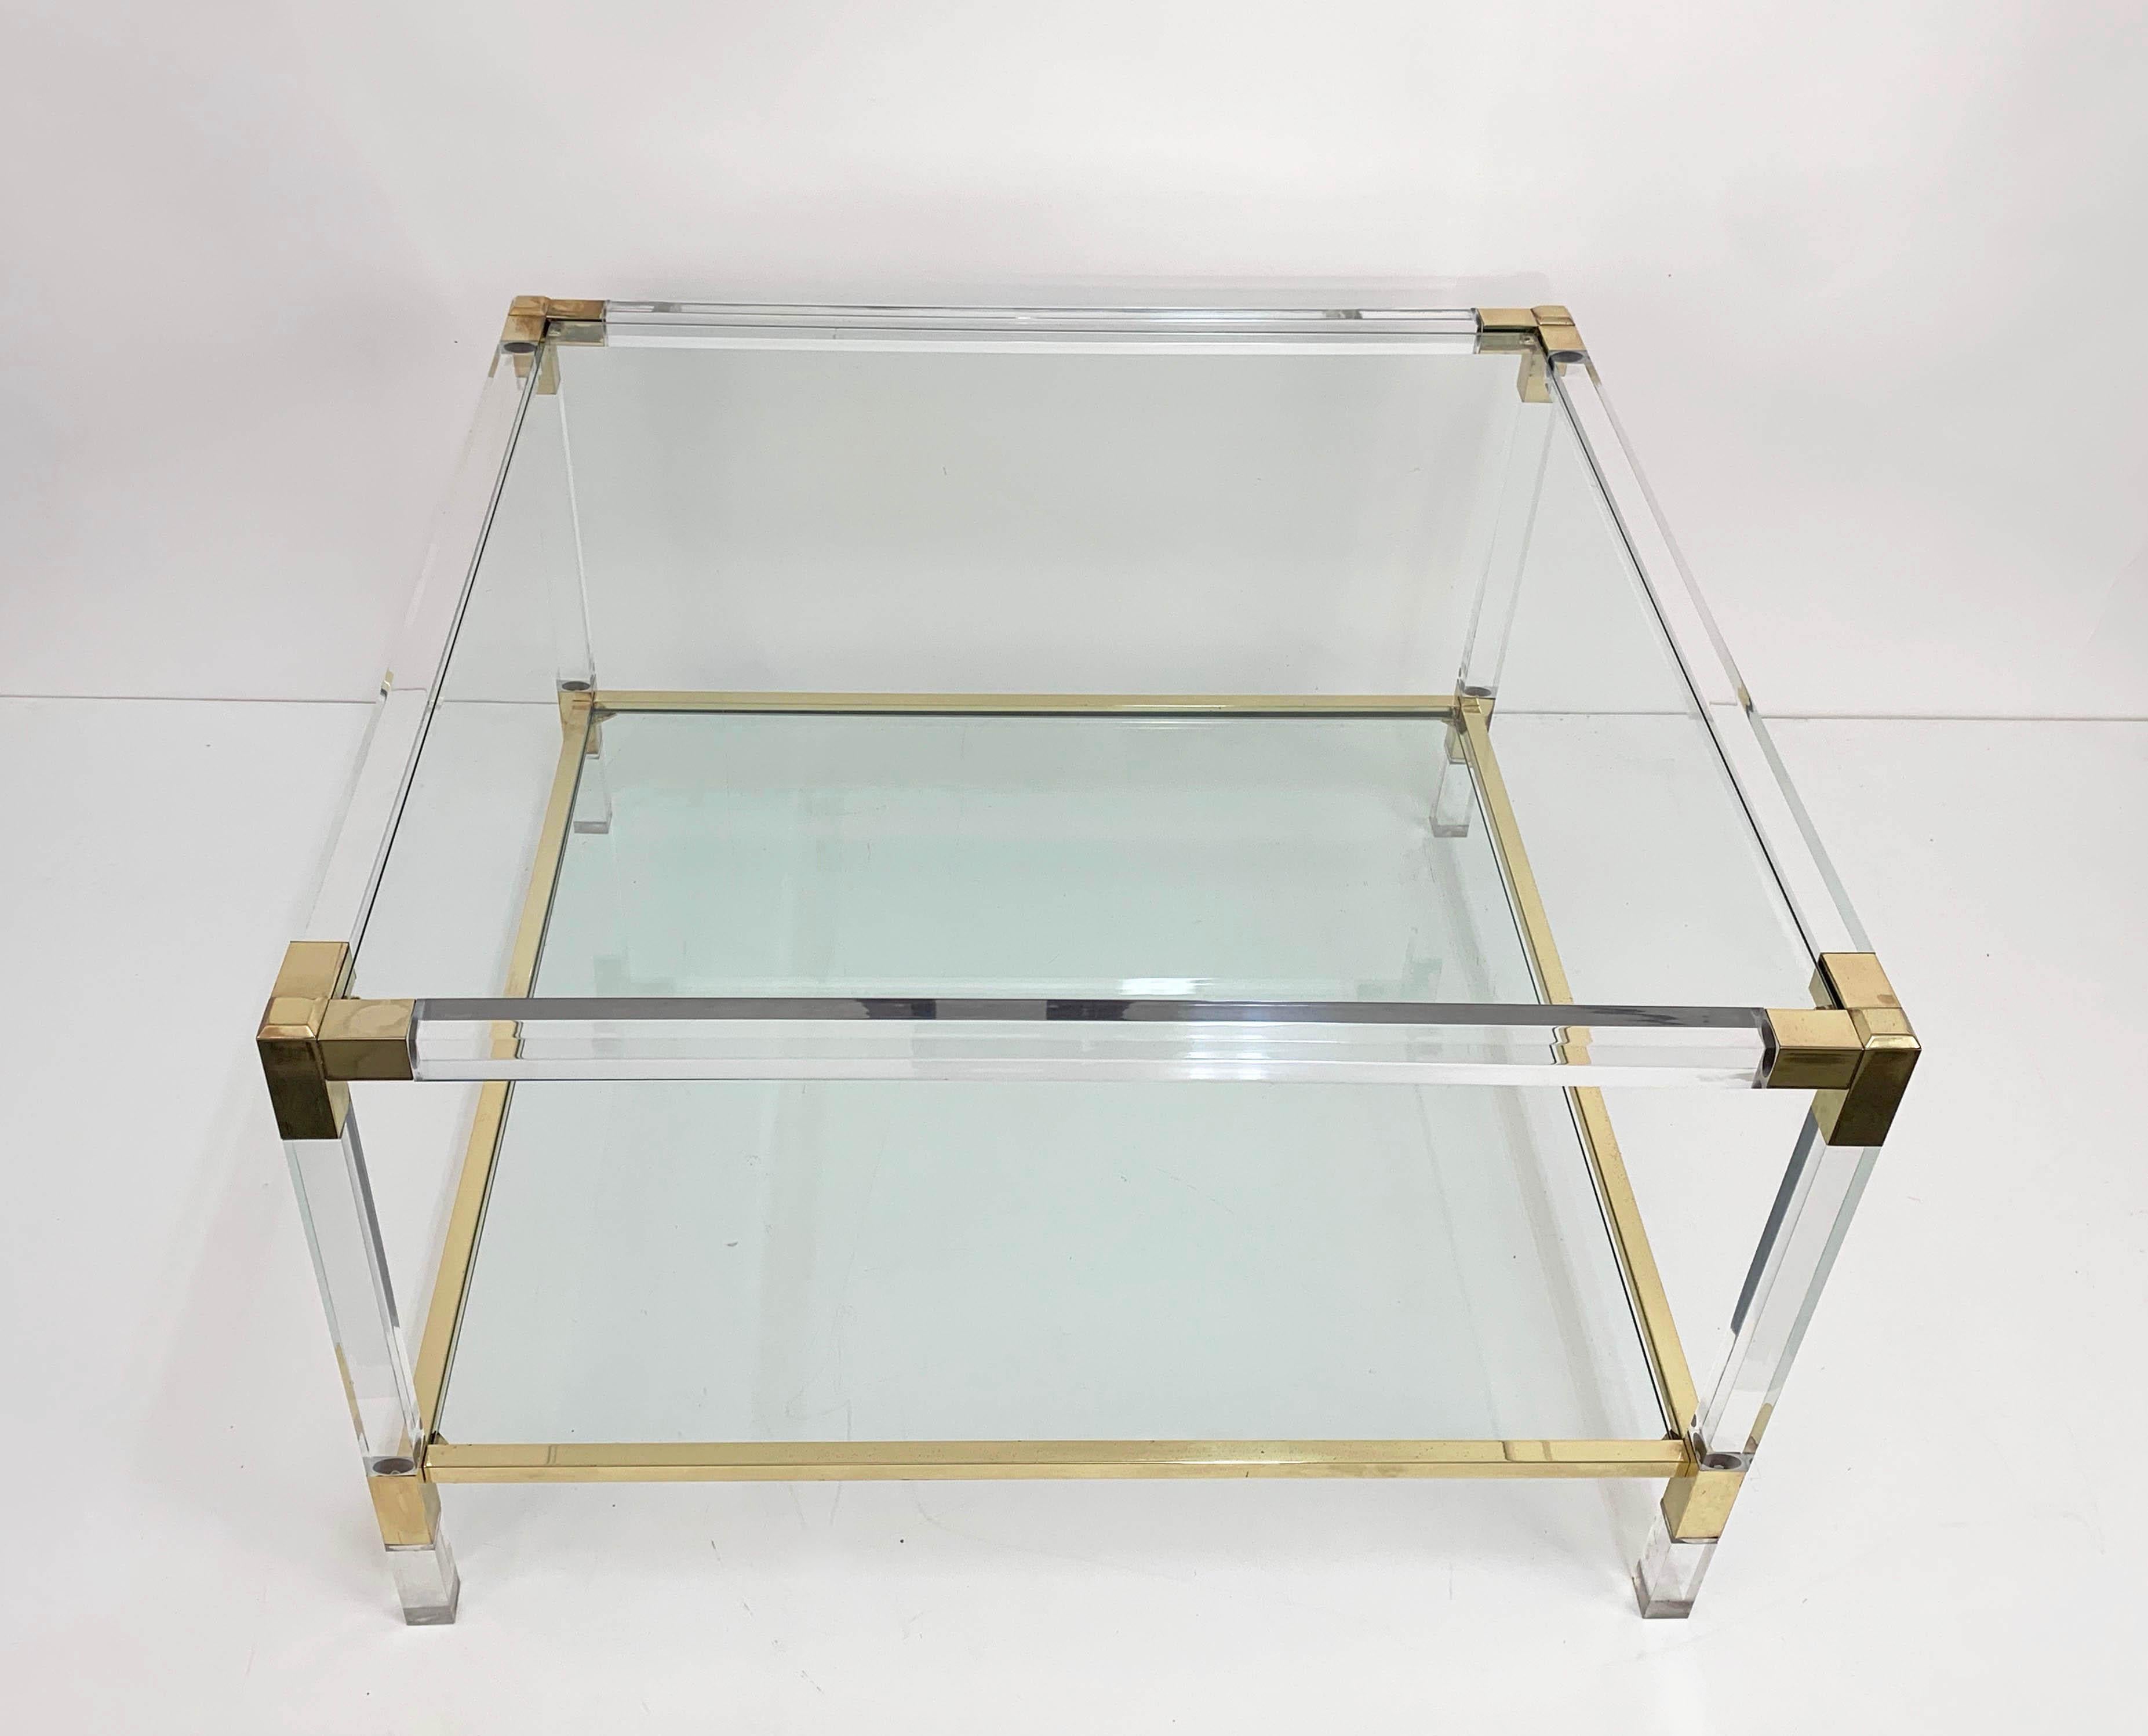 Wonderful Hollywood Regency coffee table or cocktail table with two glass shelves. This amazing item is attributed to Charles Hollis Jones and was produced in Italy during the 1970s.

This piece is amazing because of its Hollywood regency lines